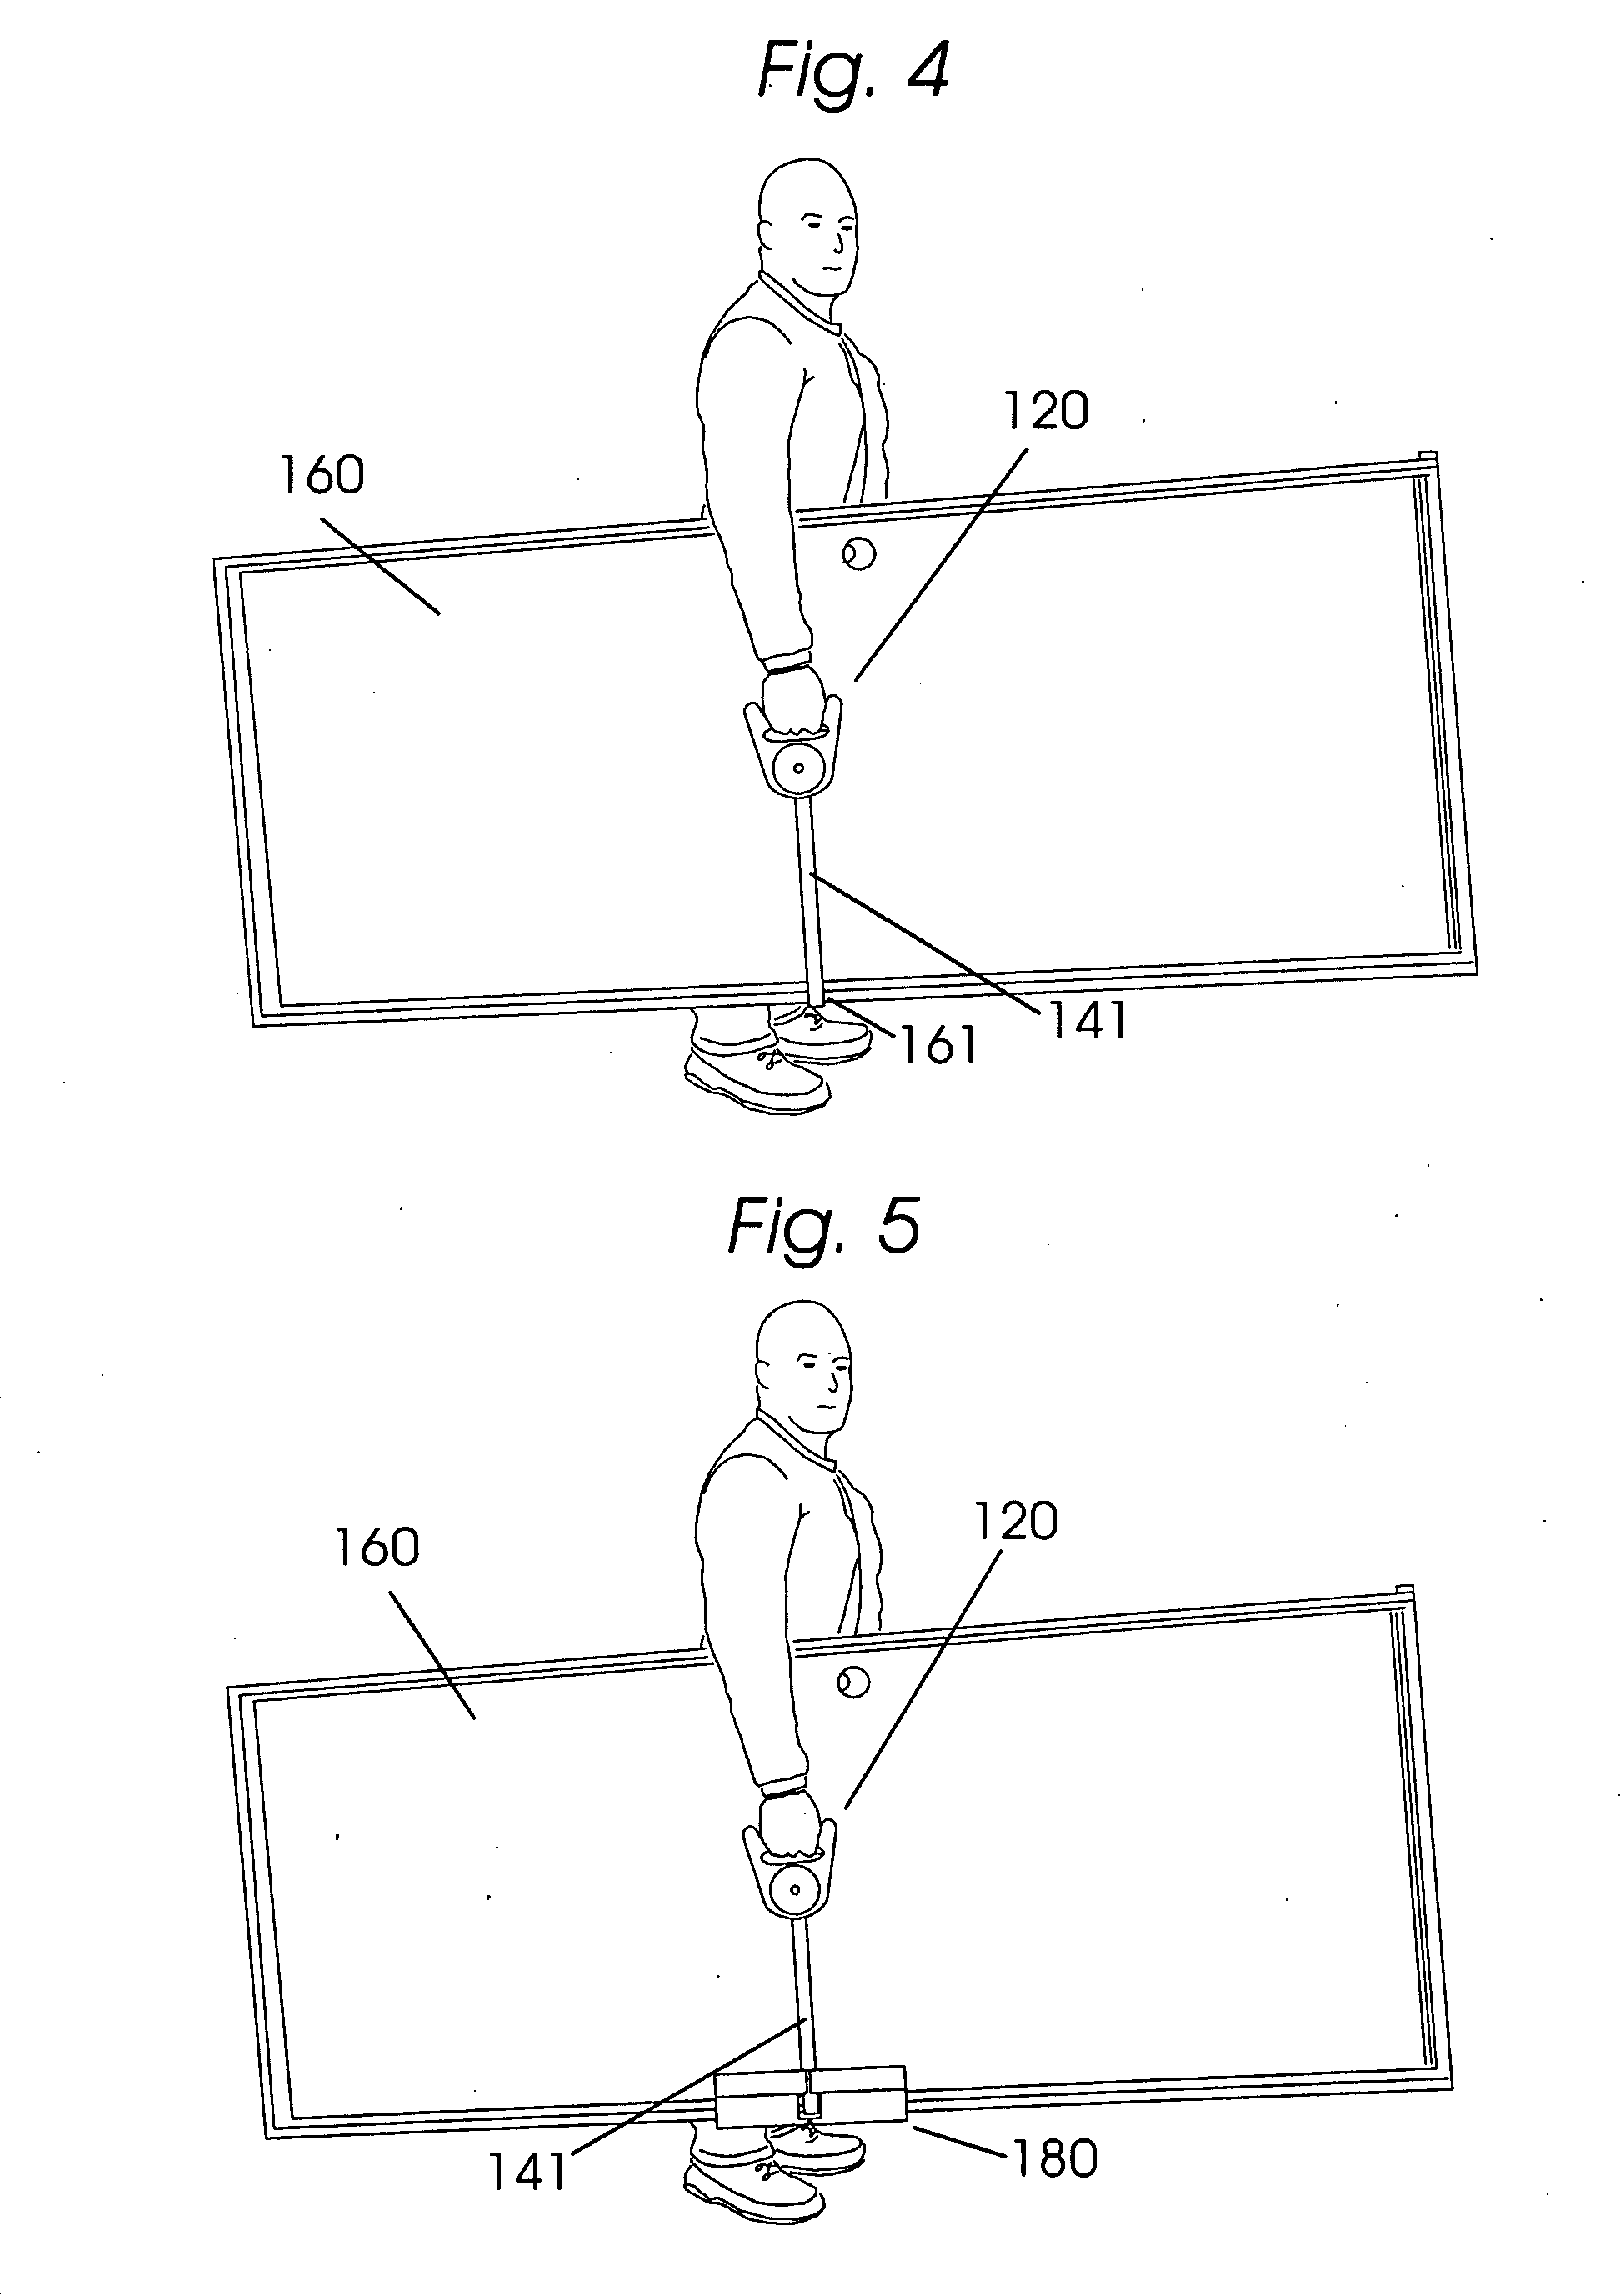 Machine and process for personal, side mounted biomechanically engineered lifting device; a means of lifting awkward and heavy loads